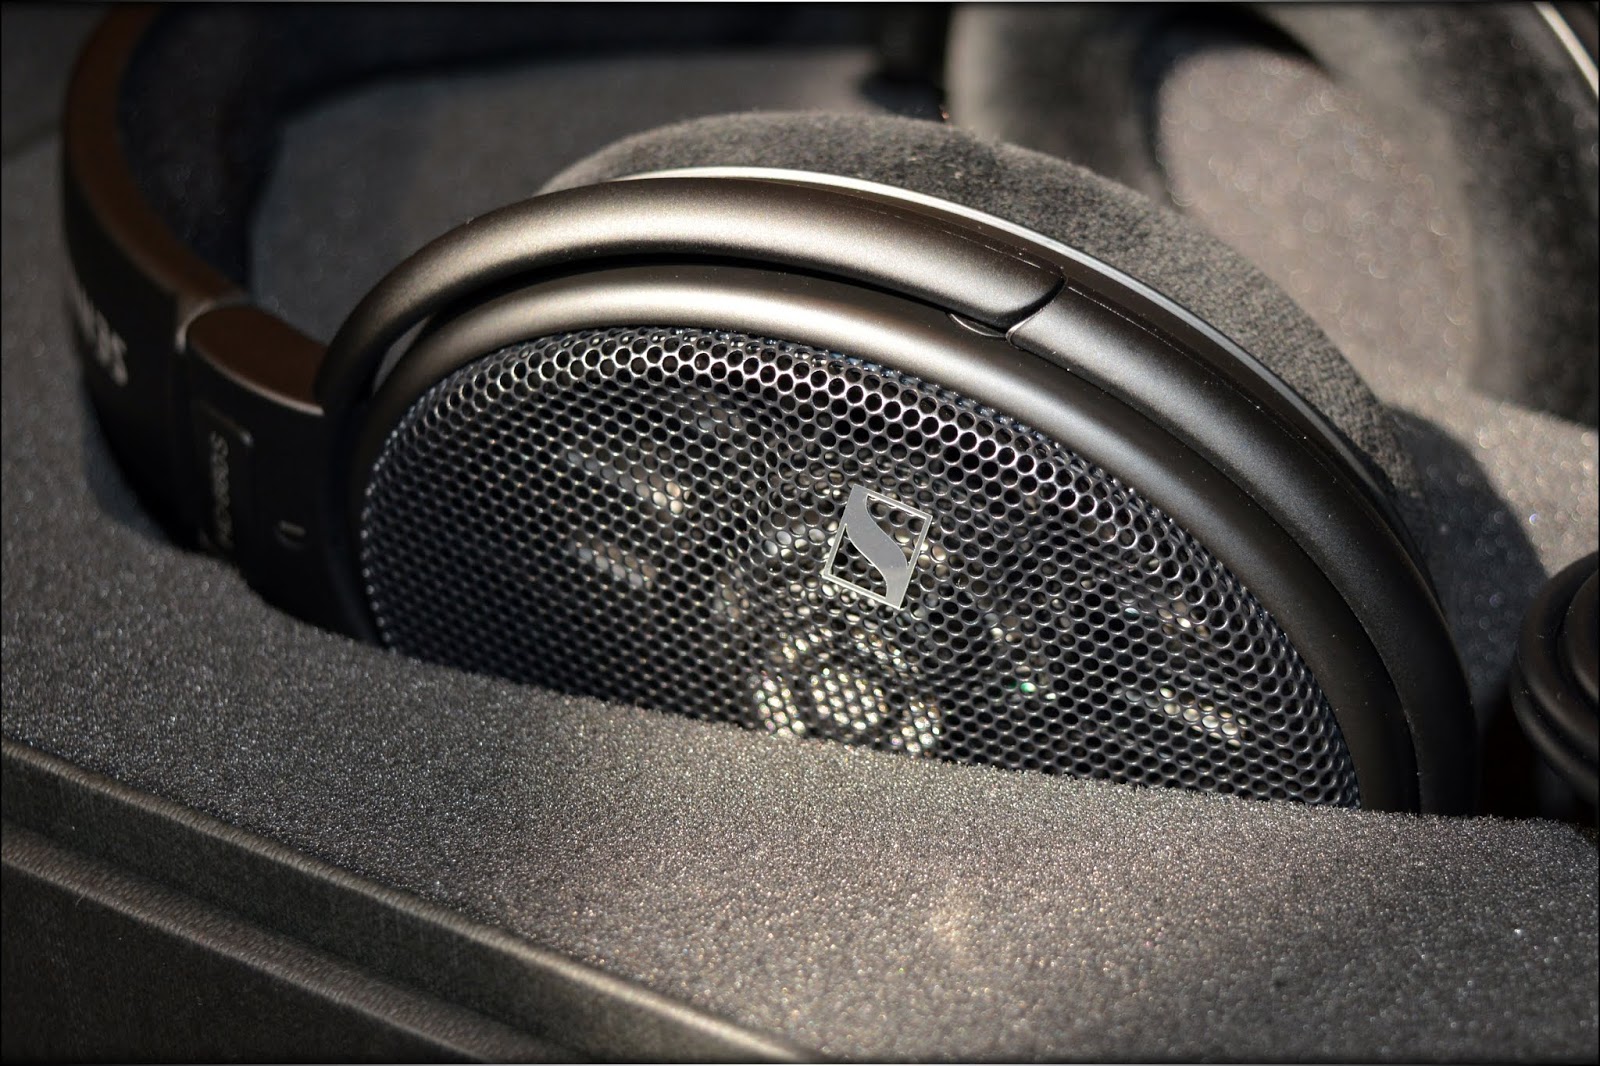 Changing The Status Quo - Sennheiser HD660S Headphones Review